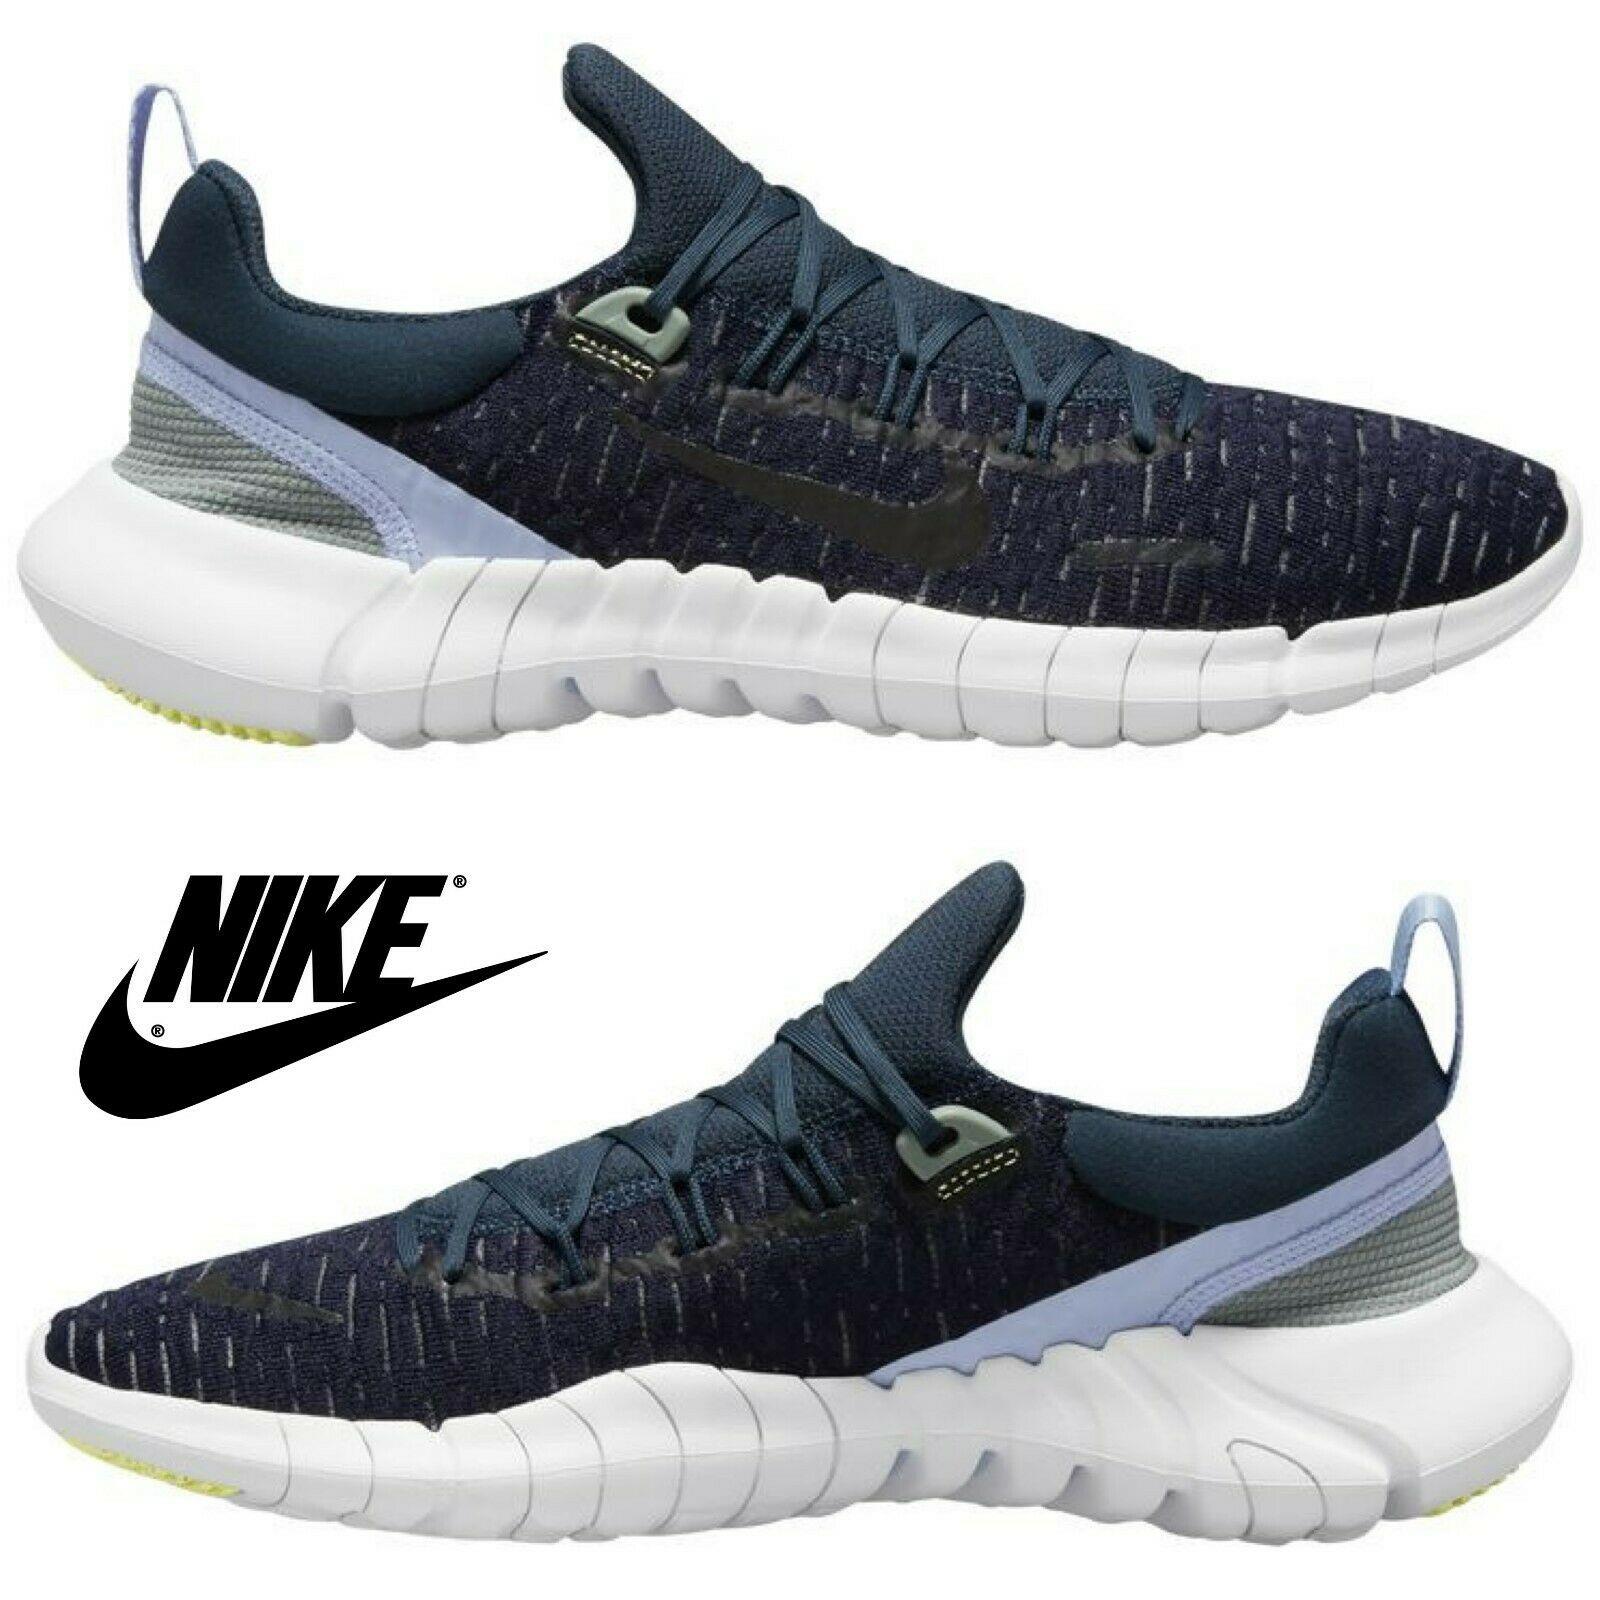 Nike Women`s Free Run 5.0 Running Shoes Running Sport Gym Casual Sneakers Navy - Blue , Armory Navy/Black/Obsidian Manufacturer